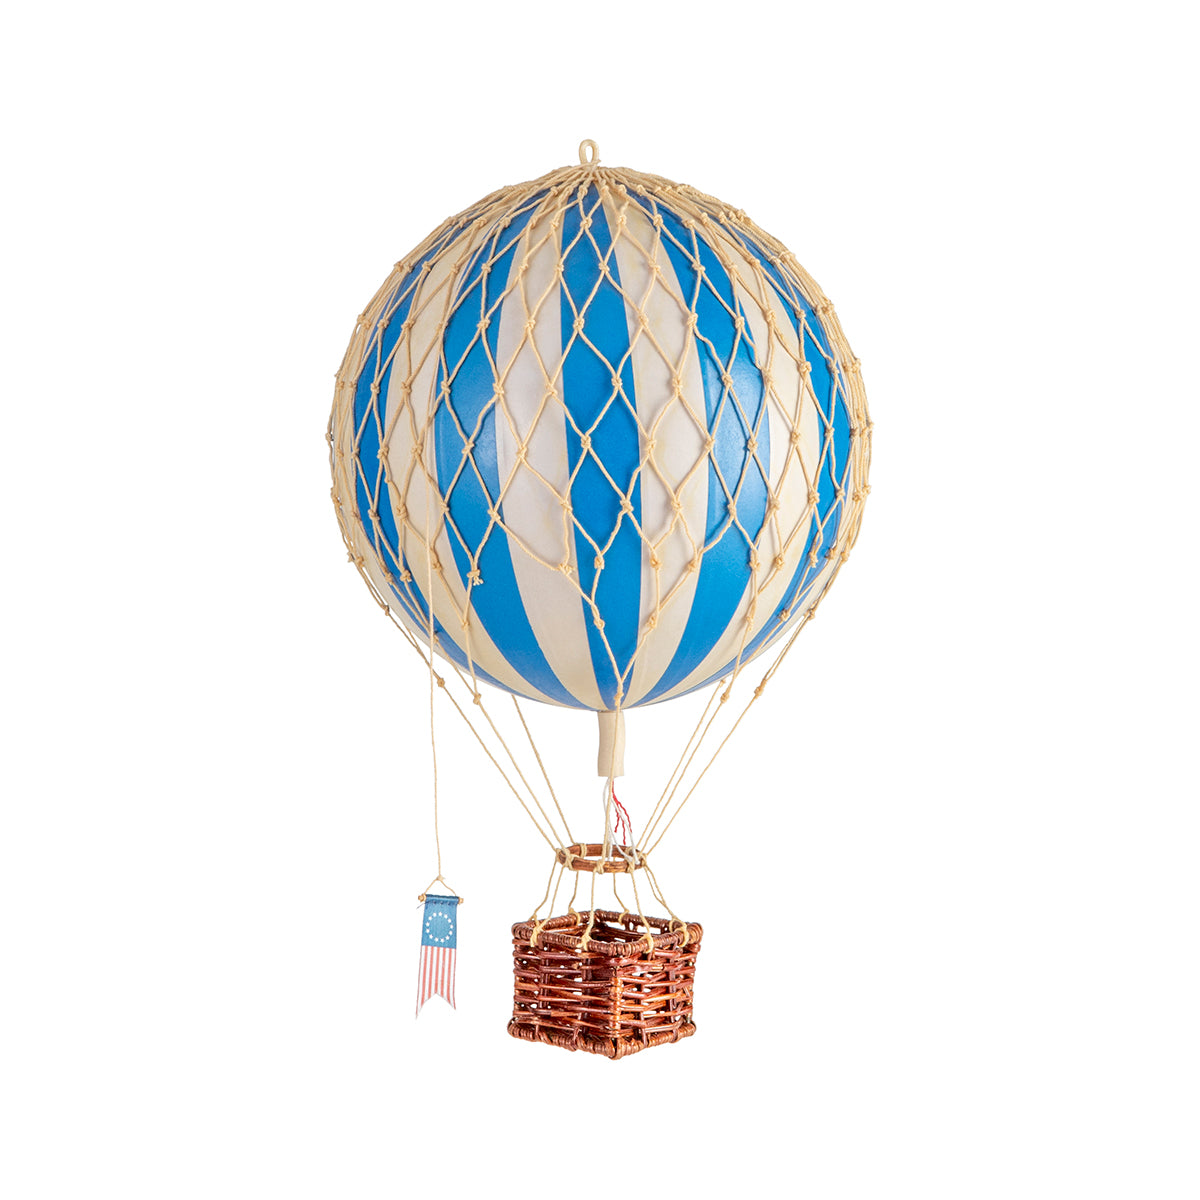 A quirky Wonderen Small Hot Air Balloon - Travels Light in blue and white floats gracefully against a white background.